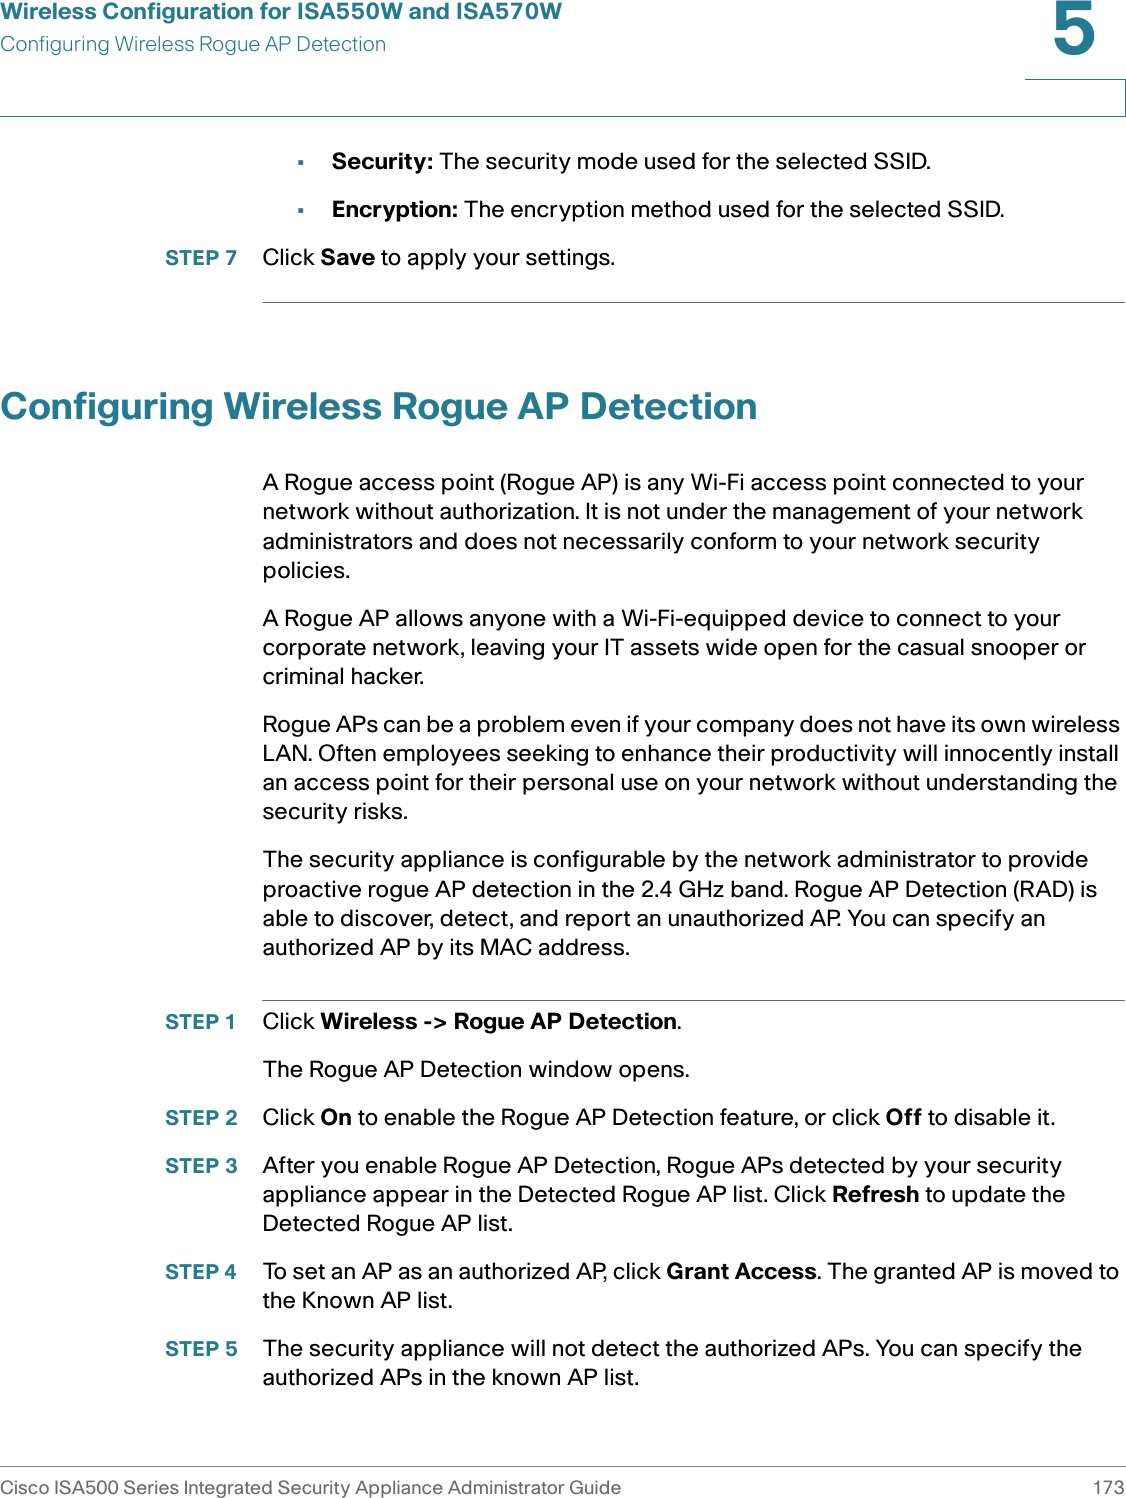 Wireless Configuration for ISA550W and ISA570WConfiguring Wireless Rogue AP DetectionCisco ISA500 Series Integrated Security Appliance Administrator Guide 1735 •Security: The security mode used for the selected SSID.•Encryption: The encryption method used for the selected SSID.STEP 7 Click Save to apply your settings. Configuring Wireless Rogue AP DetectionA Rogue access point (Rogue AP) is any Wi-Fi access point connected to your network without authorization. It is not under the management of your network administrators and does not necessarily conform to your network security policies.A Rogue AP allows anyone with a Wi-Fi-equipped device to connect to your corporate network, leaving your IT assets wide open for the casual snooper or criminal hacker. Rogue APs can be a problem even if your company does not have its own wireless LAN. Often employees seeking to enhance their productivity will innocently install an access point for their personal use on your network without understanding the security risks. The security appliance is configurable by the network administrator to provide proactive rogue AP detection in the 2.4 GHz band. Rogue AP Detection (RAD) is able to discover, detect, and report an unauthorized AP. You can specify an authorized AP by its MAC address. STEP 1 Click Wireless -&gt; Rogue AP Detection.The Rogue AP Detection window opens.STEP 2 Click On to enable the Rogue AP Detection feature, or click Off to disable it. STEP 3 After you enable Rogue AP Detection, Rogue APs detected by your security appliance appear in the Detected Rogue AP list. Click Refresh to update the Detected Rogue AP list. STEP 4 To set an AP as an authorized AP, click Grant Access. The granted AP is moved to the Known AP list. STEP 5 The security appliance will not detect the authorized APs. You can specify the authorized APs in the known AP list. 